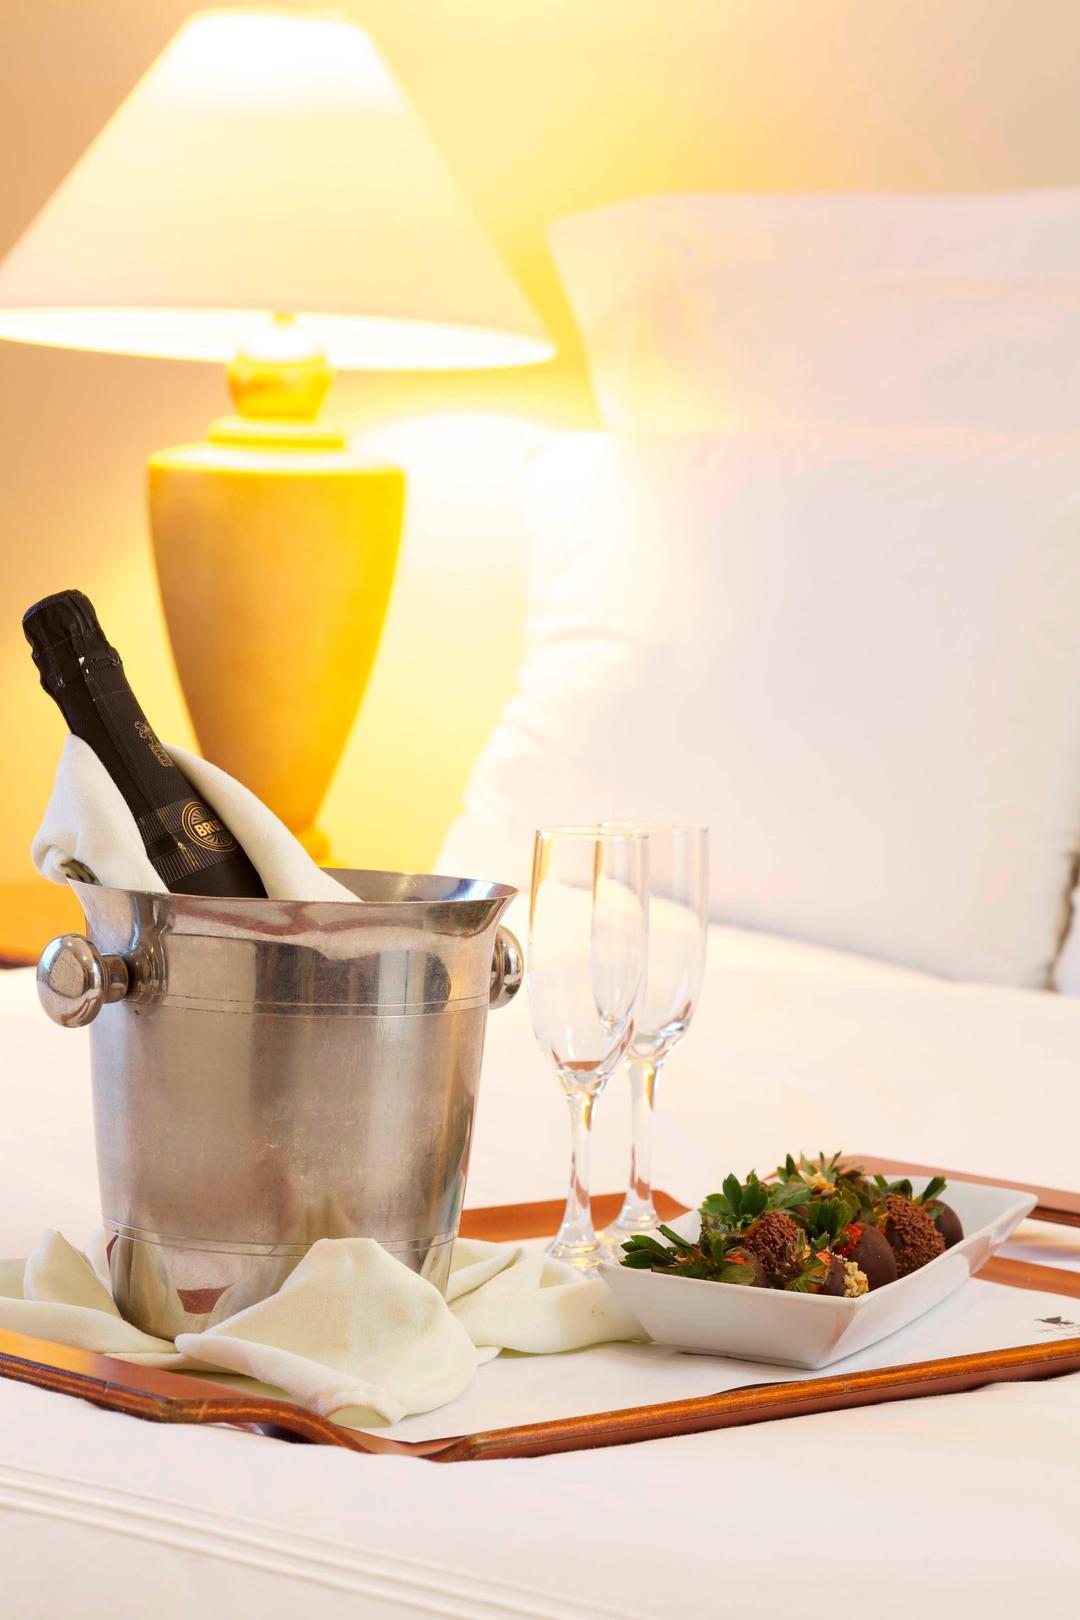 We offer a honeymoon package that includes strawberries and sparkling wine to give you the perfect way to start your honeymoon.